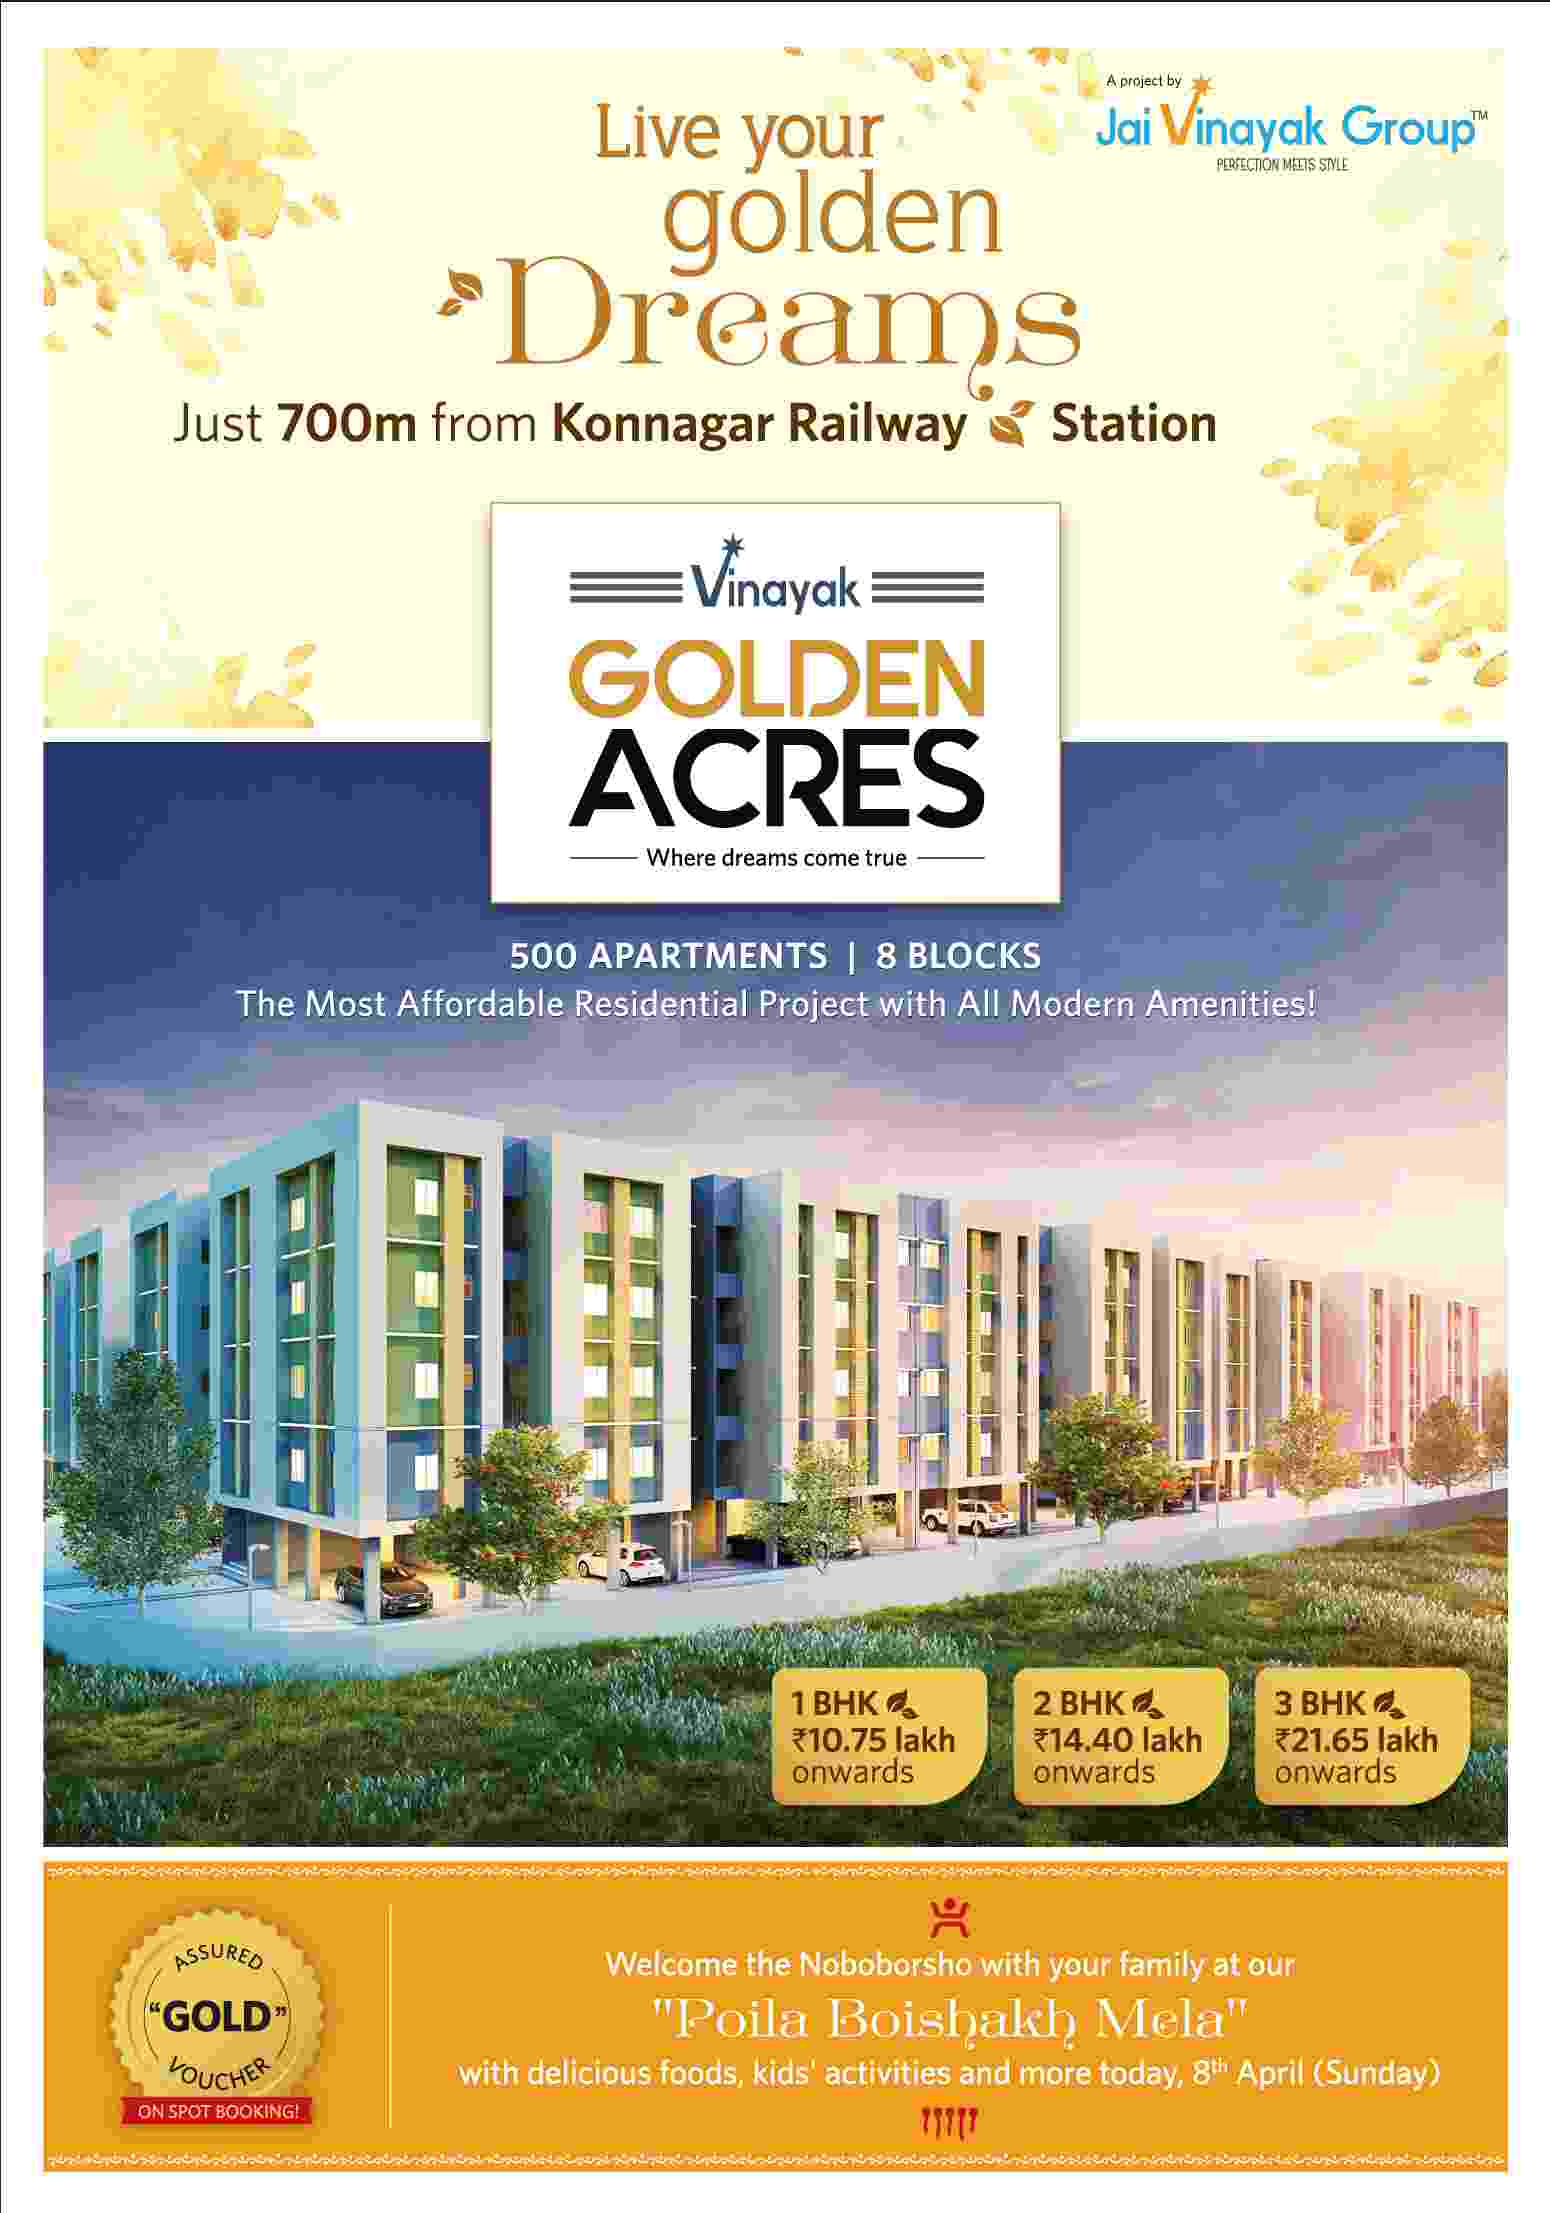 Get GST benefit against input tax credit & Rs. 2.67 Lac subsidy against PMAY at Jai Vinayak Golden Acres in Kolkata Update